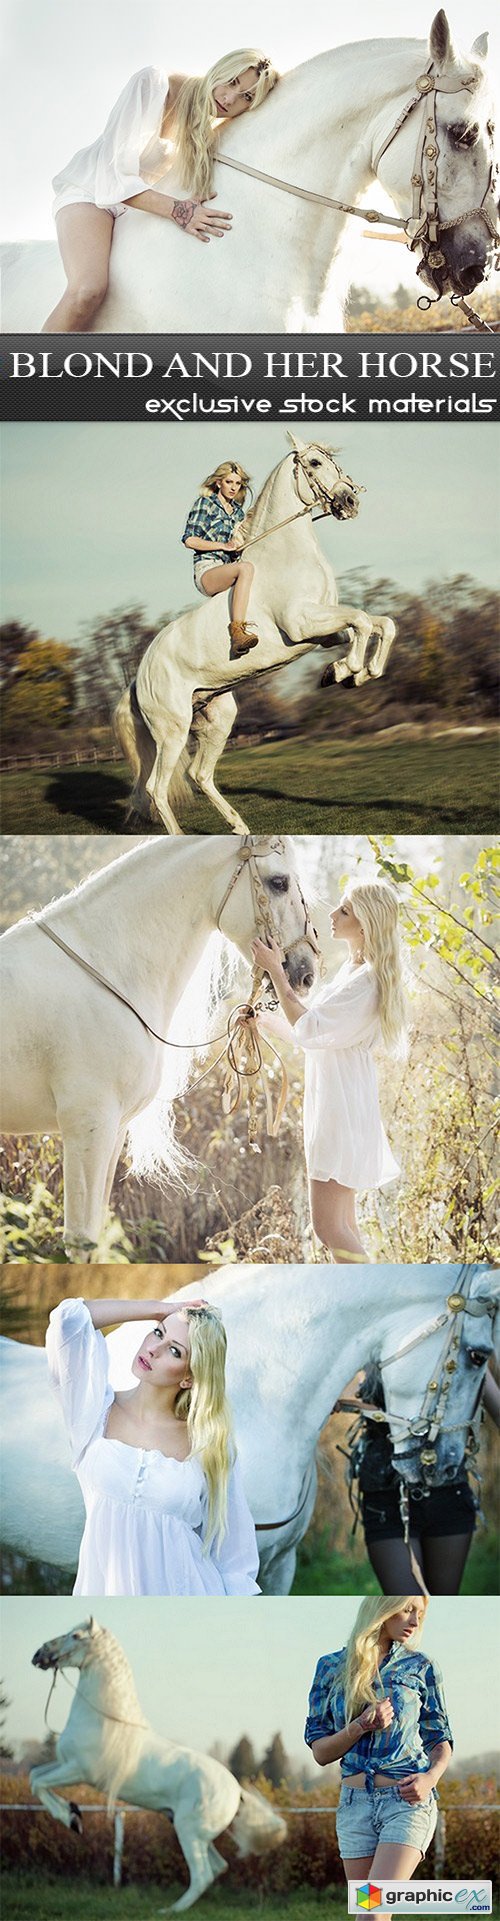 Blond and her horse - 5 UHQ JPEG